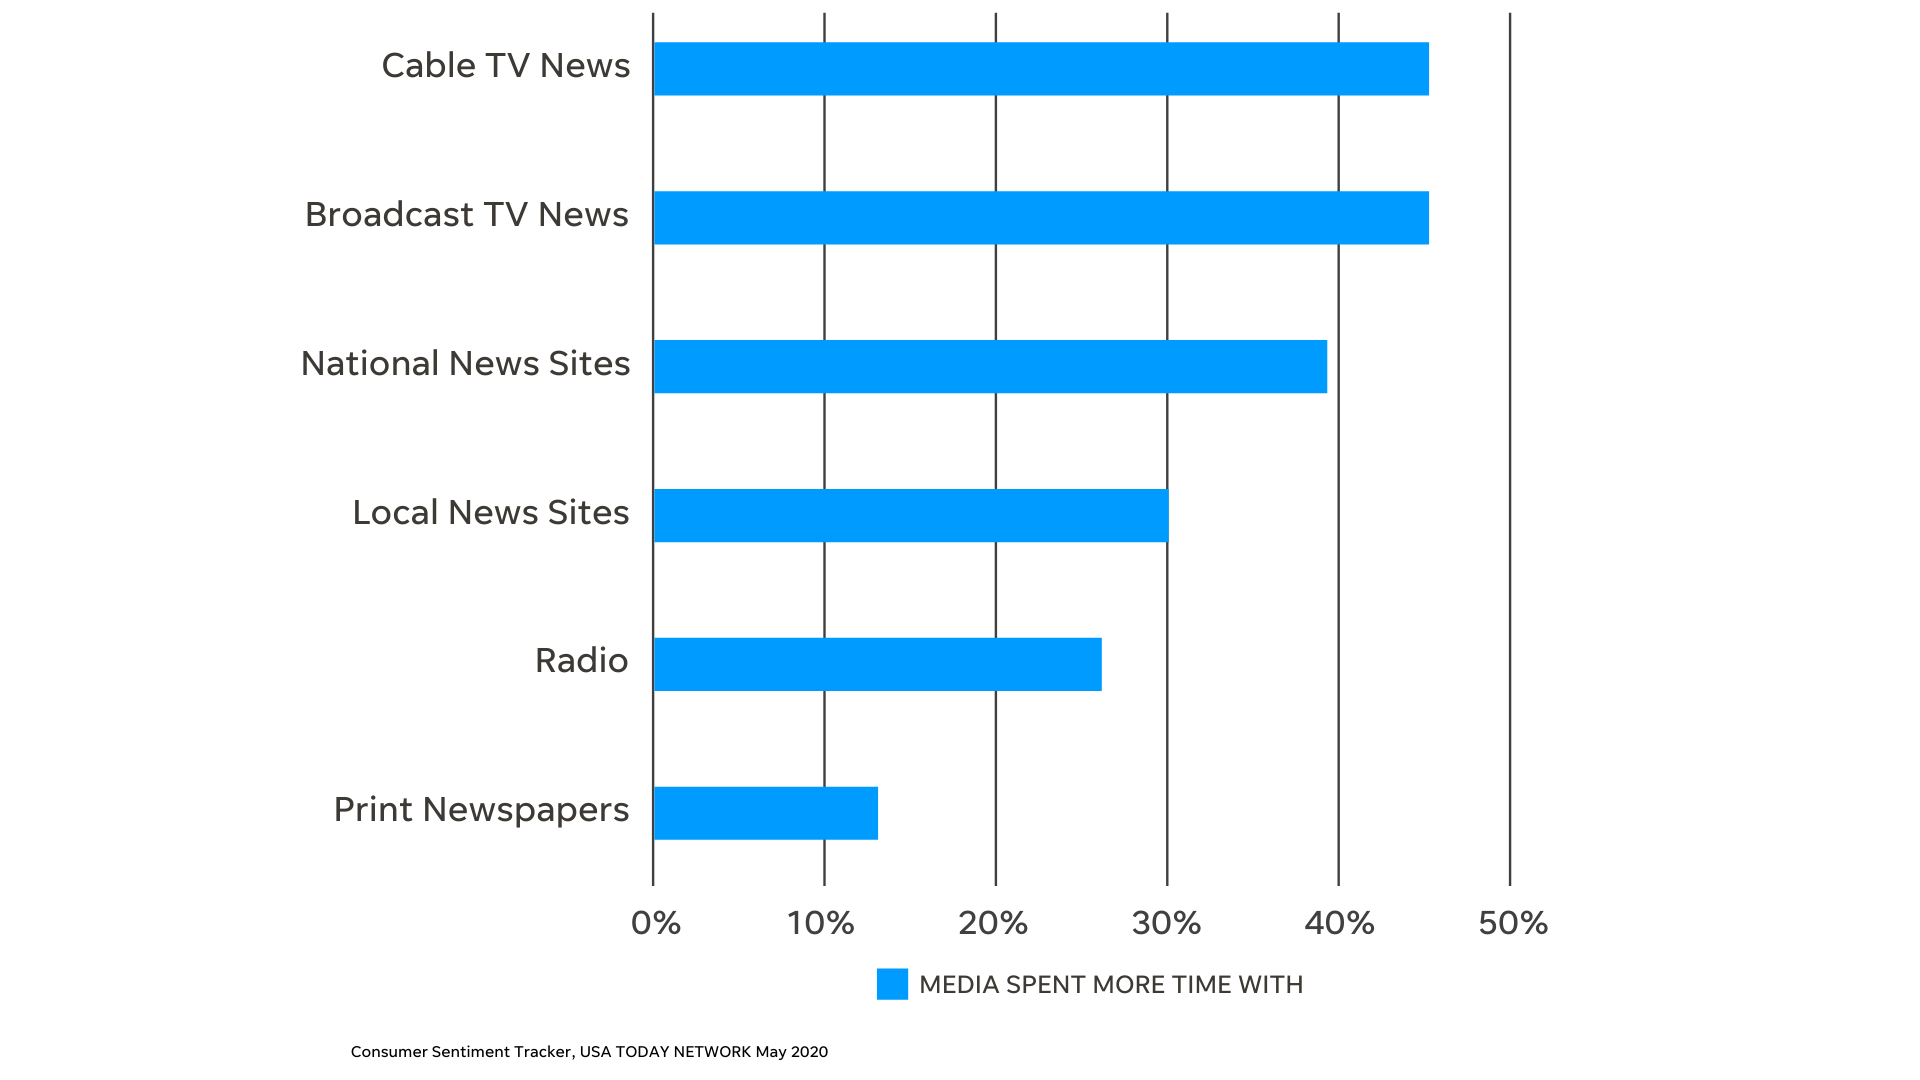 chart shows media consumption increase across news channels during covid-19